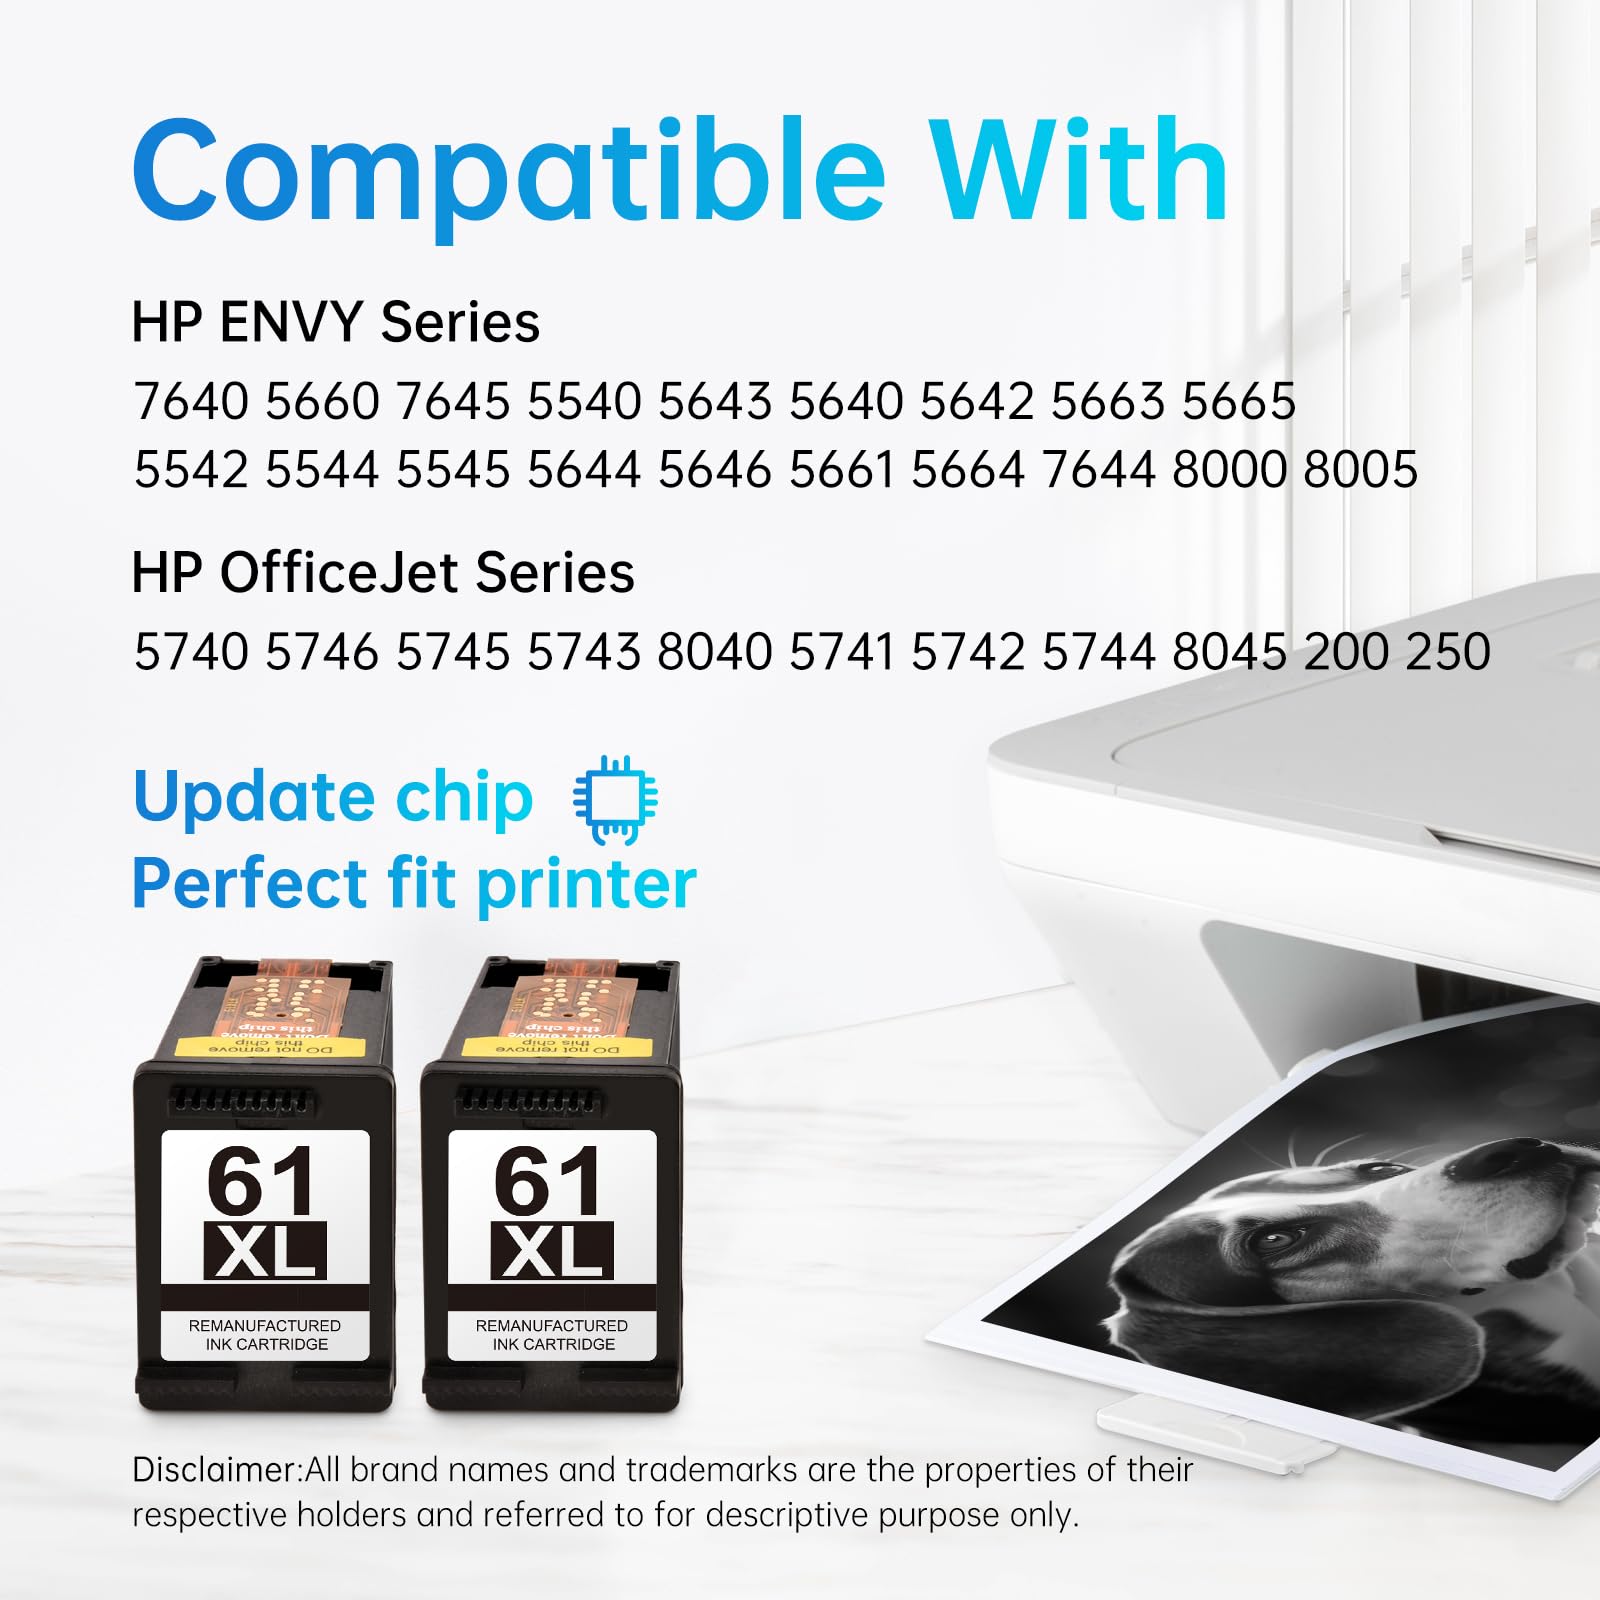 Printer Compatibility List for LEMERO HP 61XL Black Ink Cartridges:Comprehensive compatibility list for LEMERO HP 61XL black ink cartridges, showcasing supported HP ENVY and OfficeJet printer models, emphasizing the updated chip for perfect printer fit.